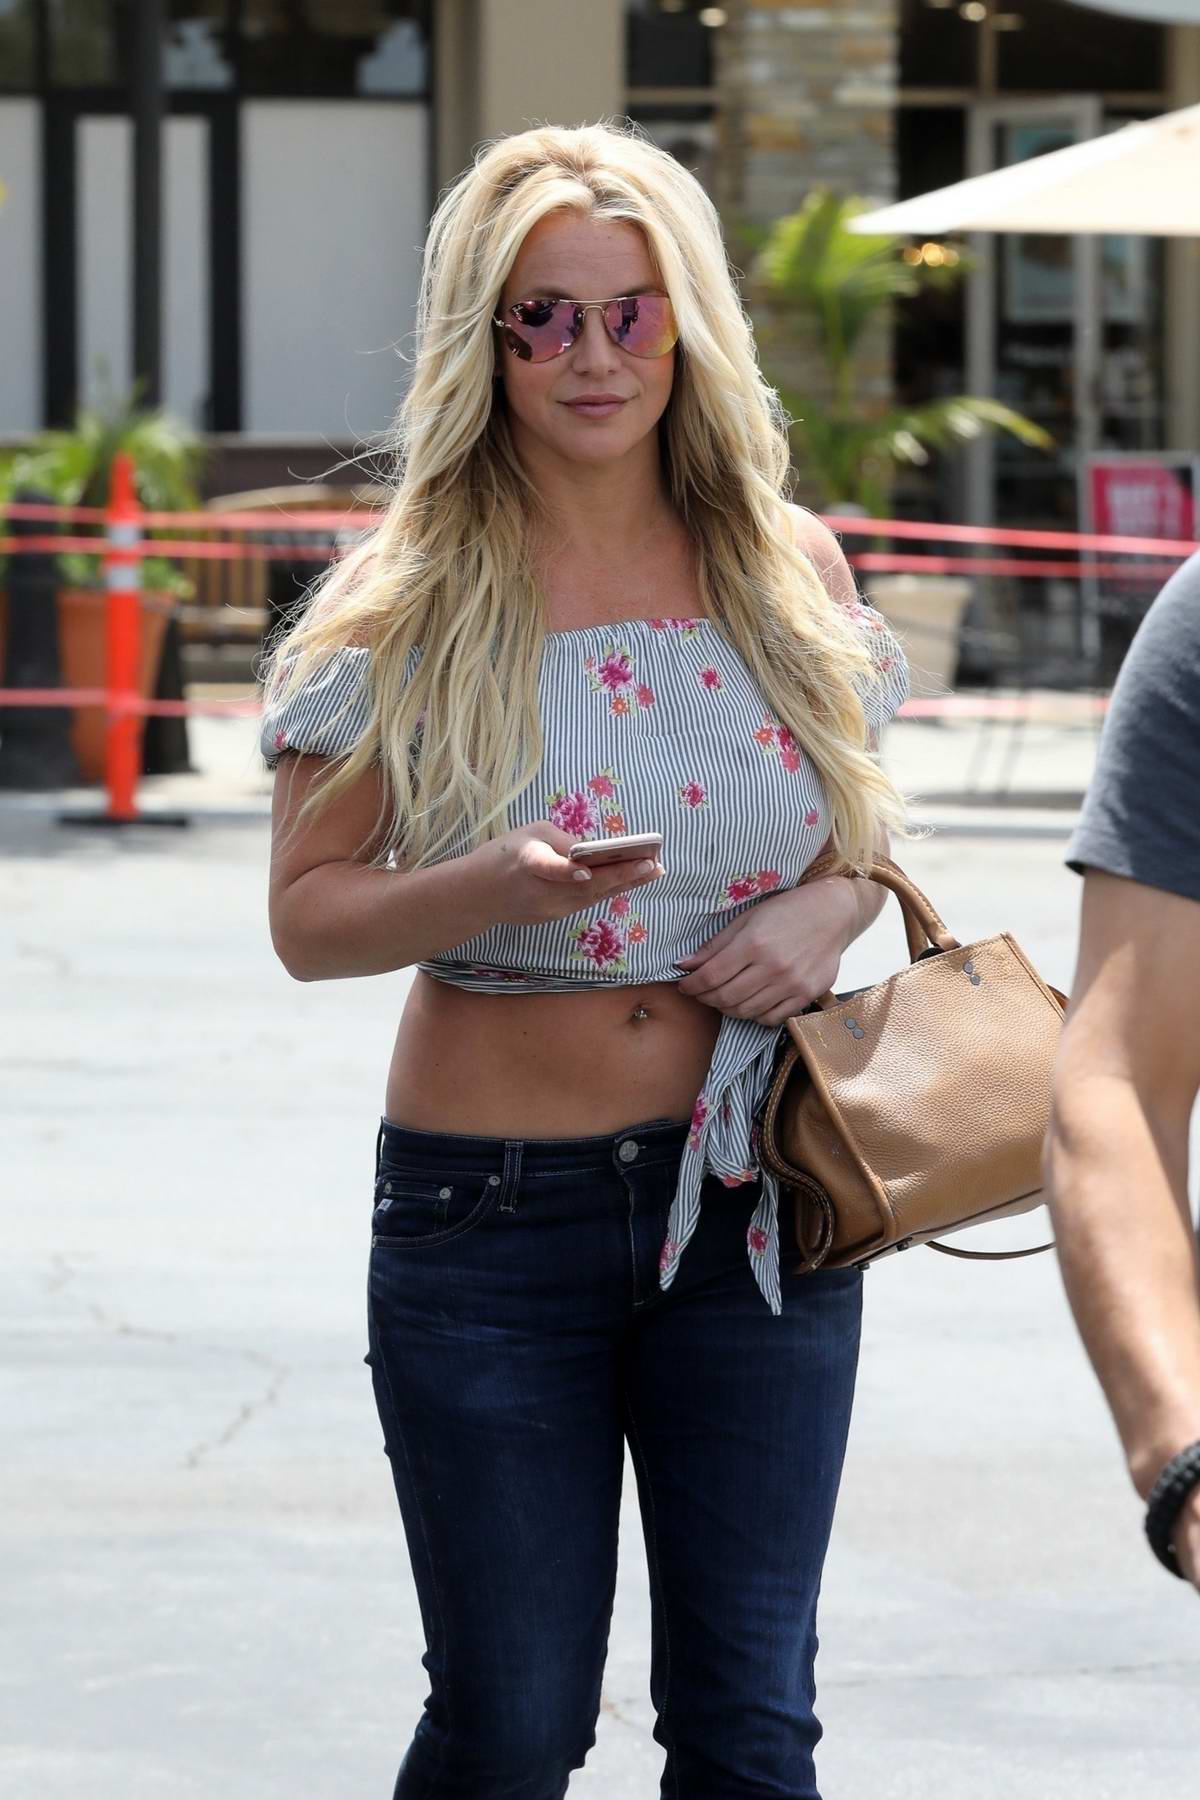 Britney Spears Shows Off Her Midriff In A Crop Top And Low Rise Jeans